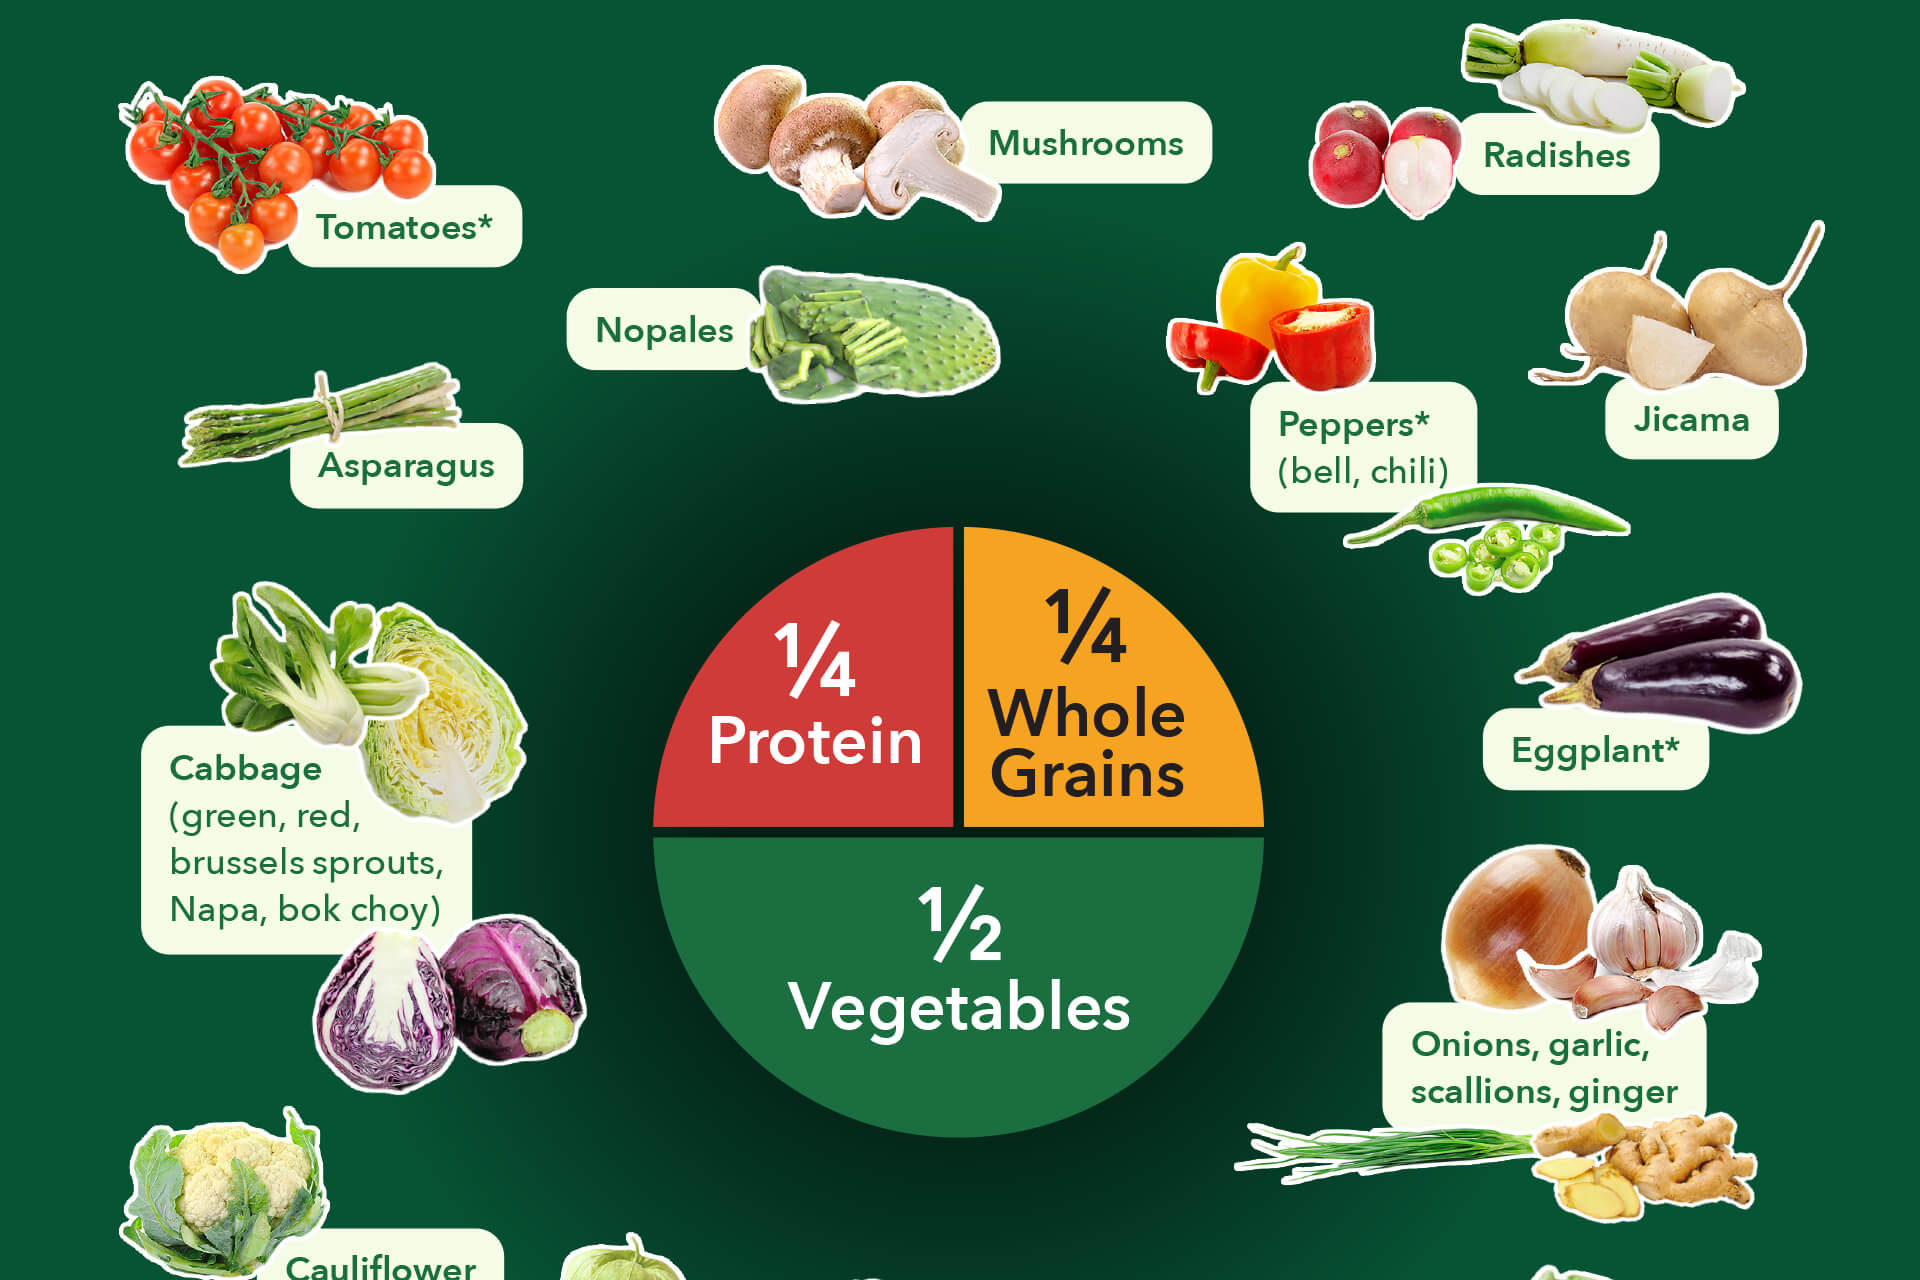 Personalize Your Plate! Pick a Vegetable